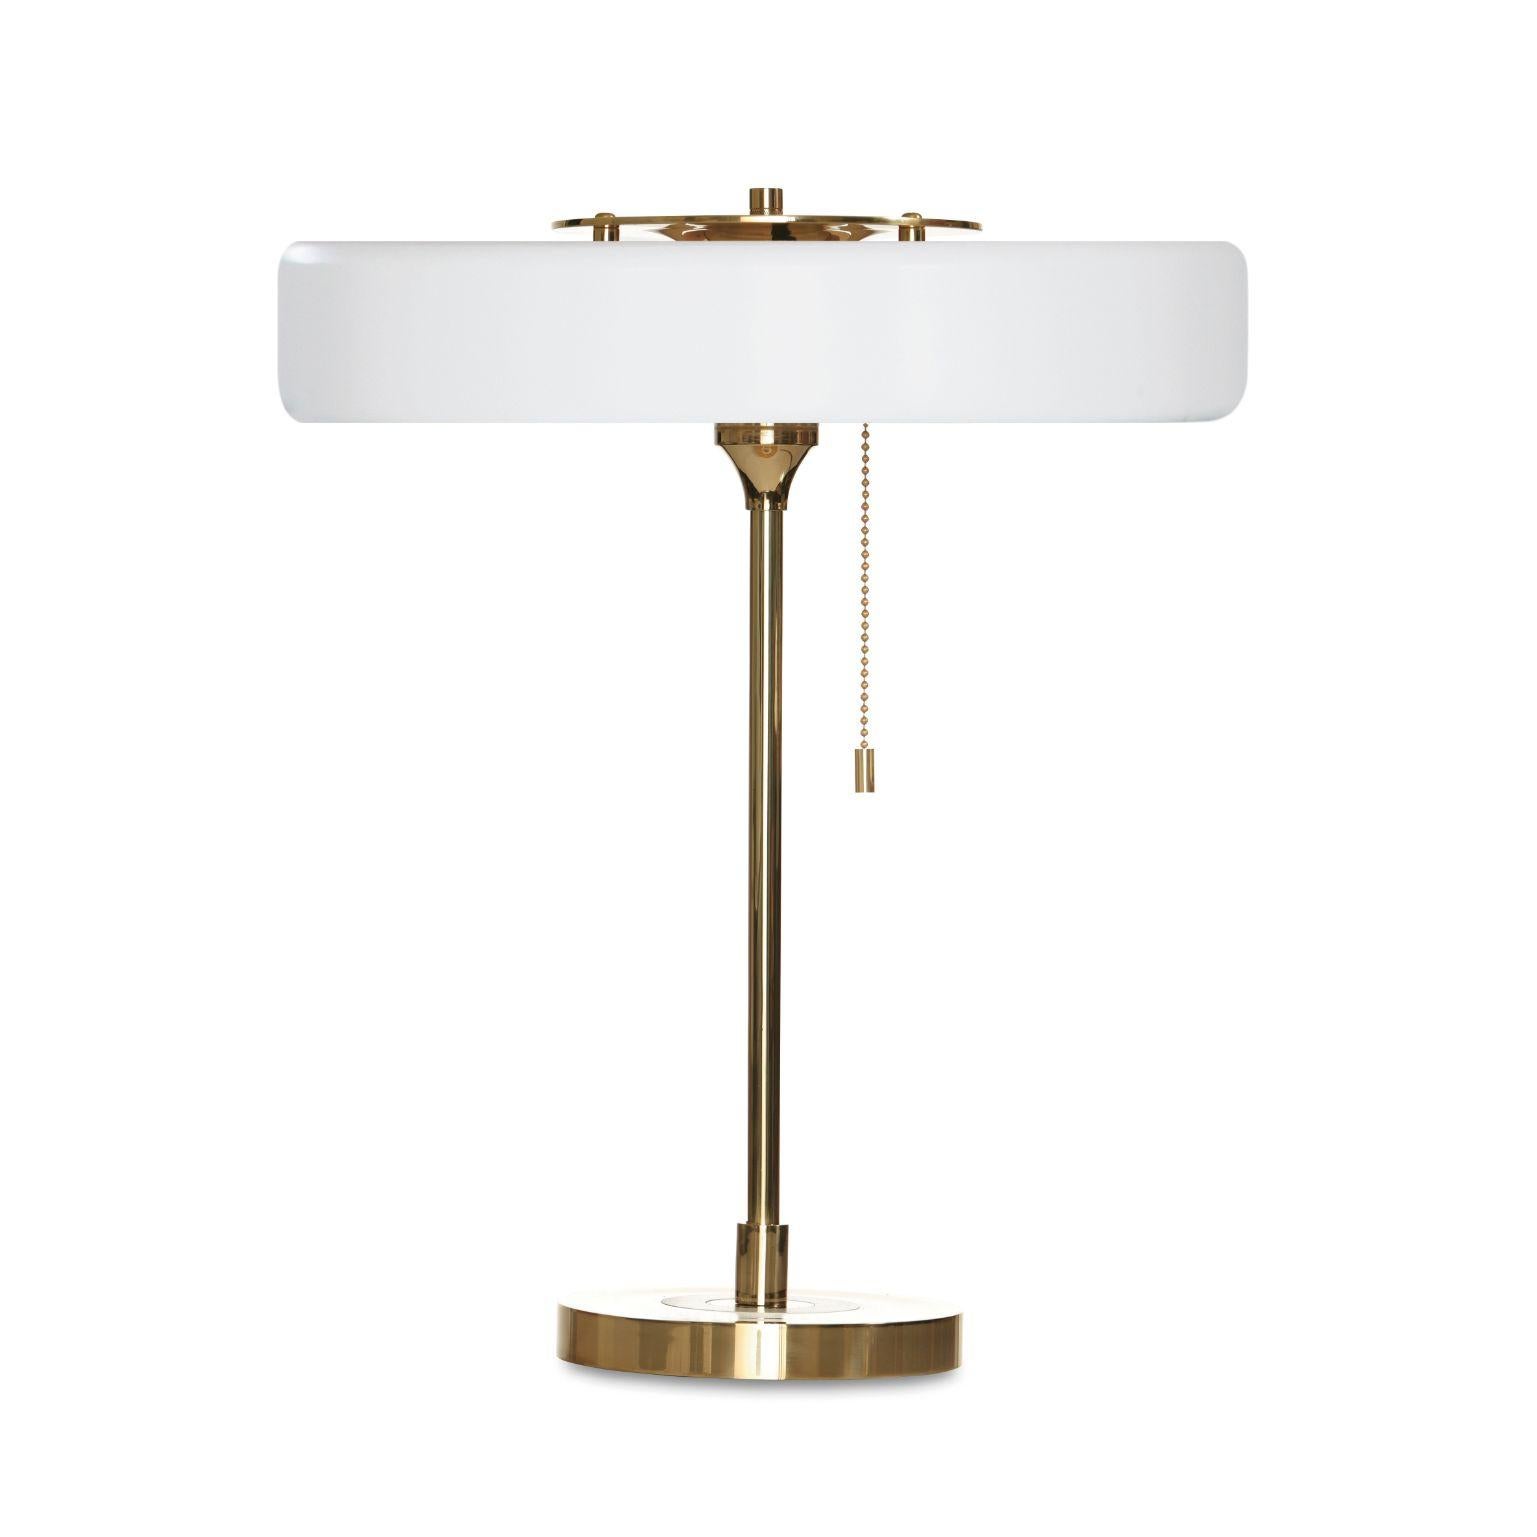 Revolve table lamp - Brushed brass - White by Bert Frank
Dimensions: 42 x 35 x 15 cm
Materials: Brass, Steel

Also available in polished brass.

When Adam Yeats and Robbie Llewellyn founded Bert Frank in 2013 it was a meeting of minds and the start